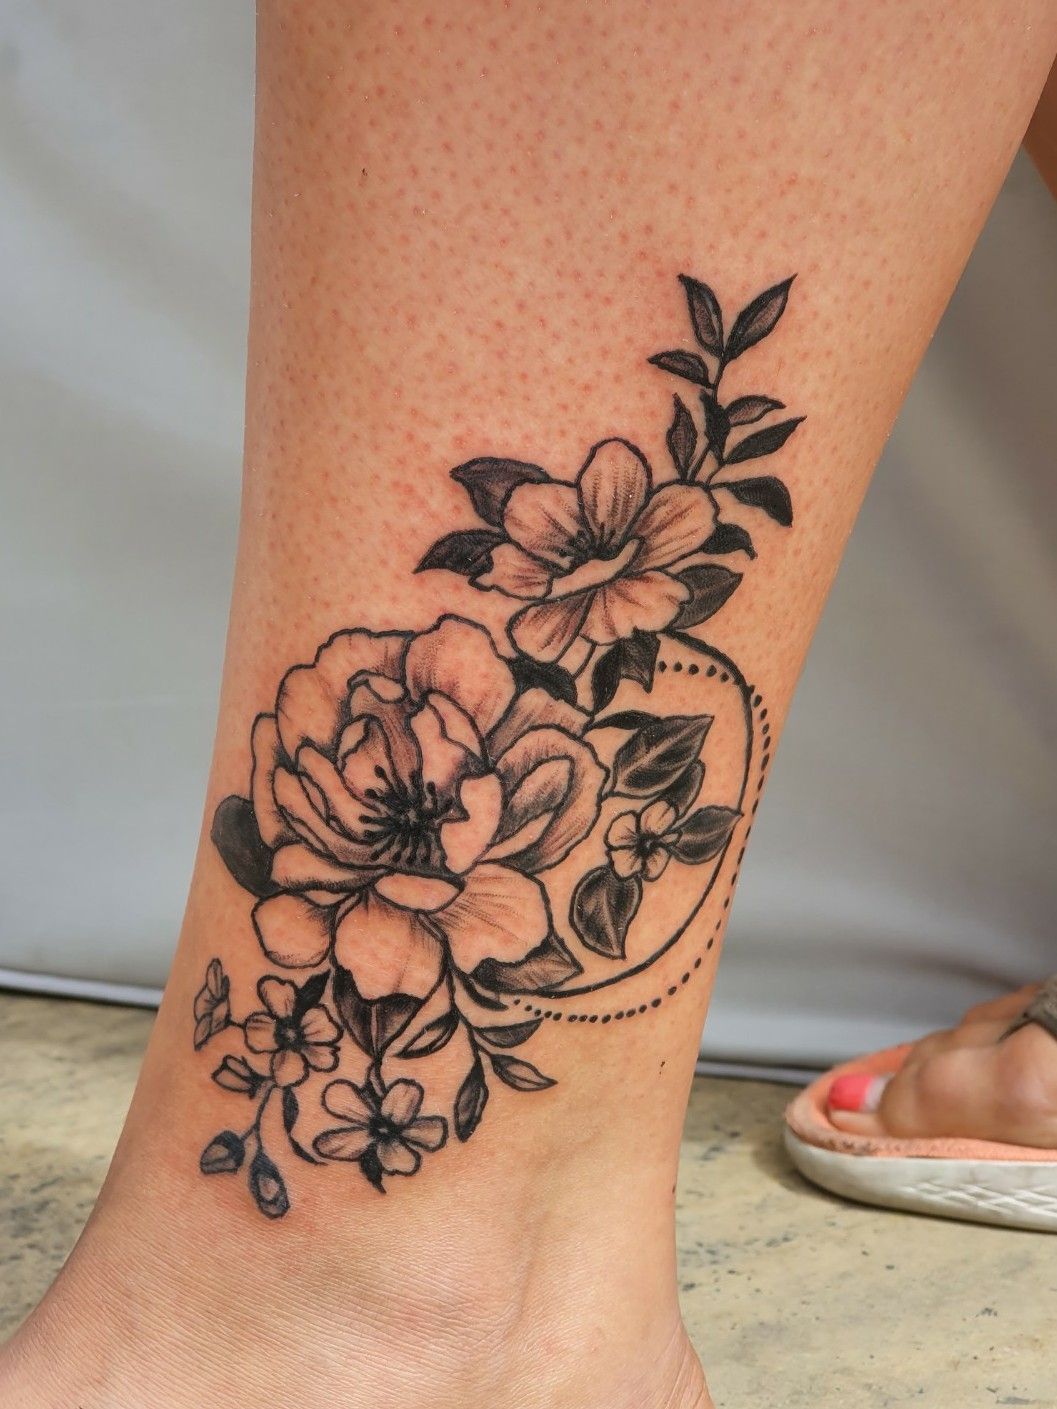 16+ Amazing Ankle Tattoo Designs You Need To See!